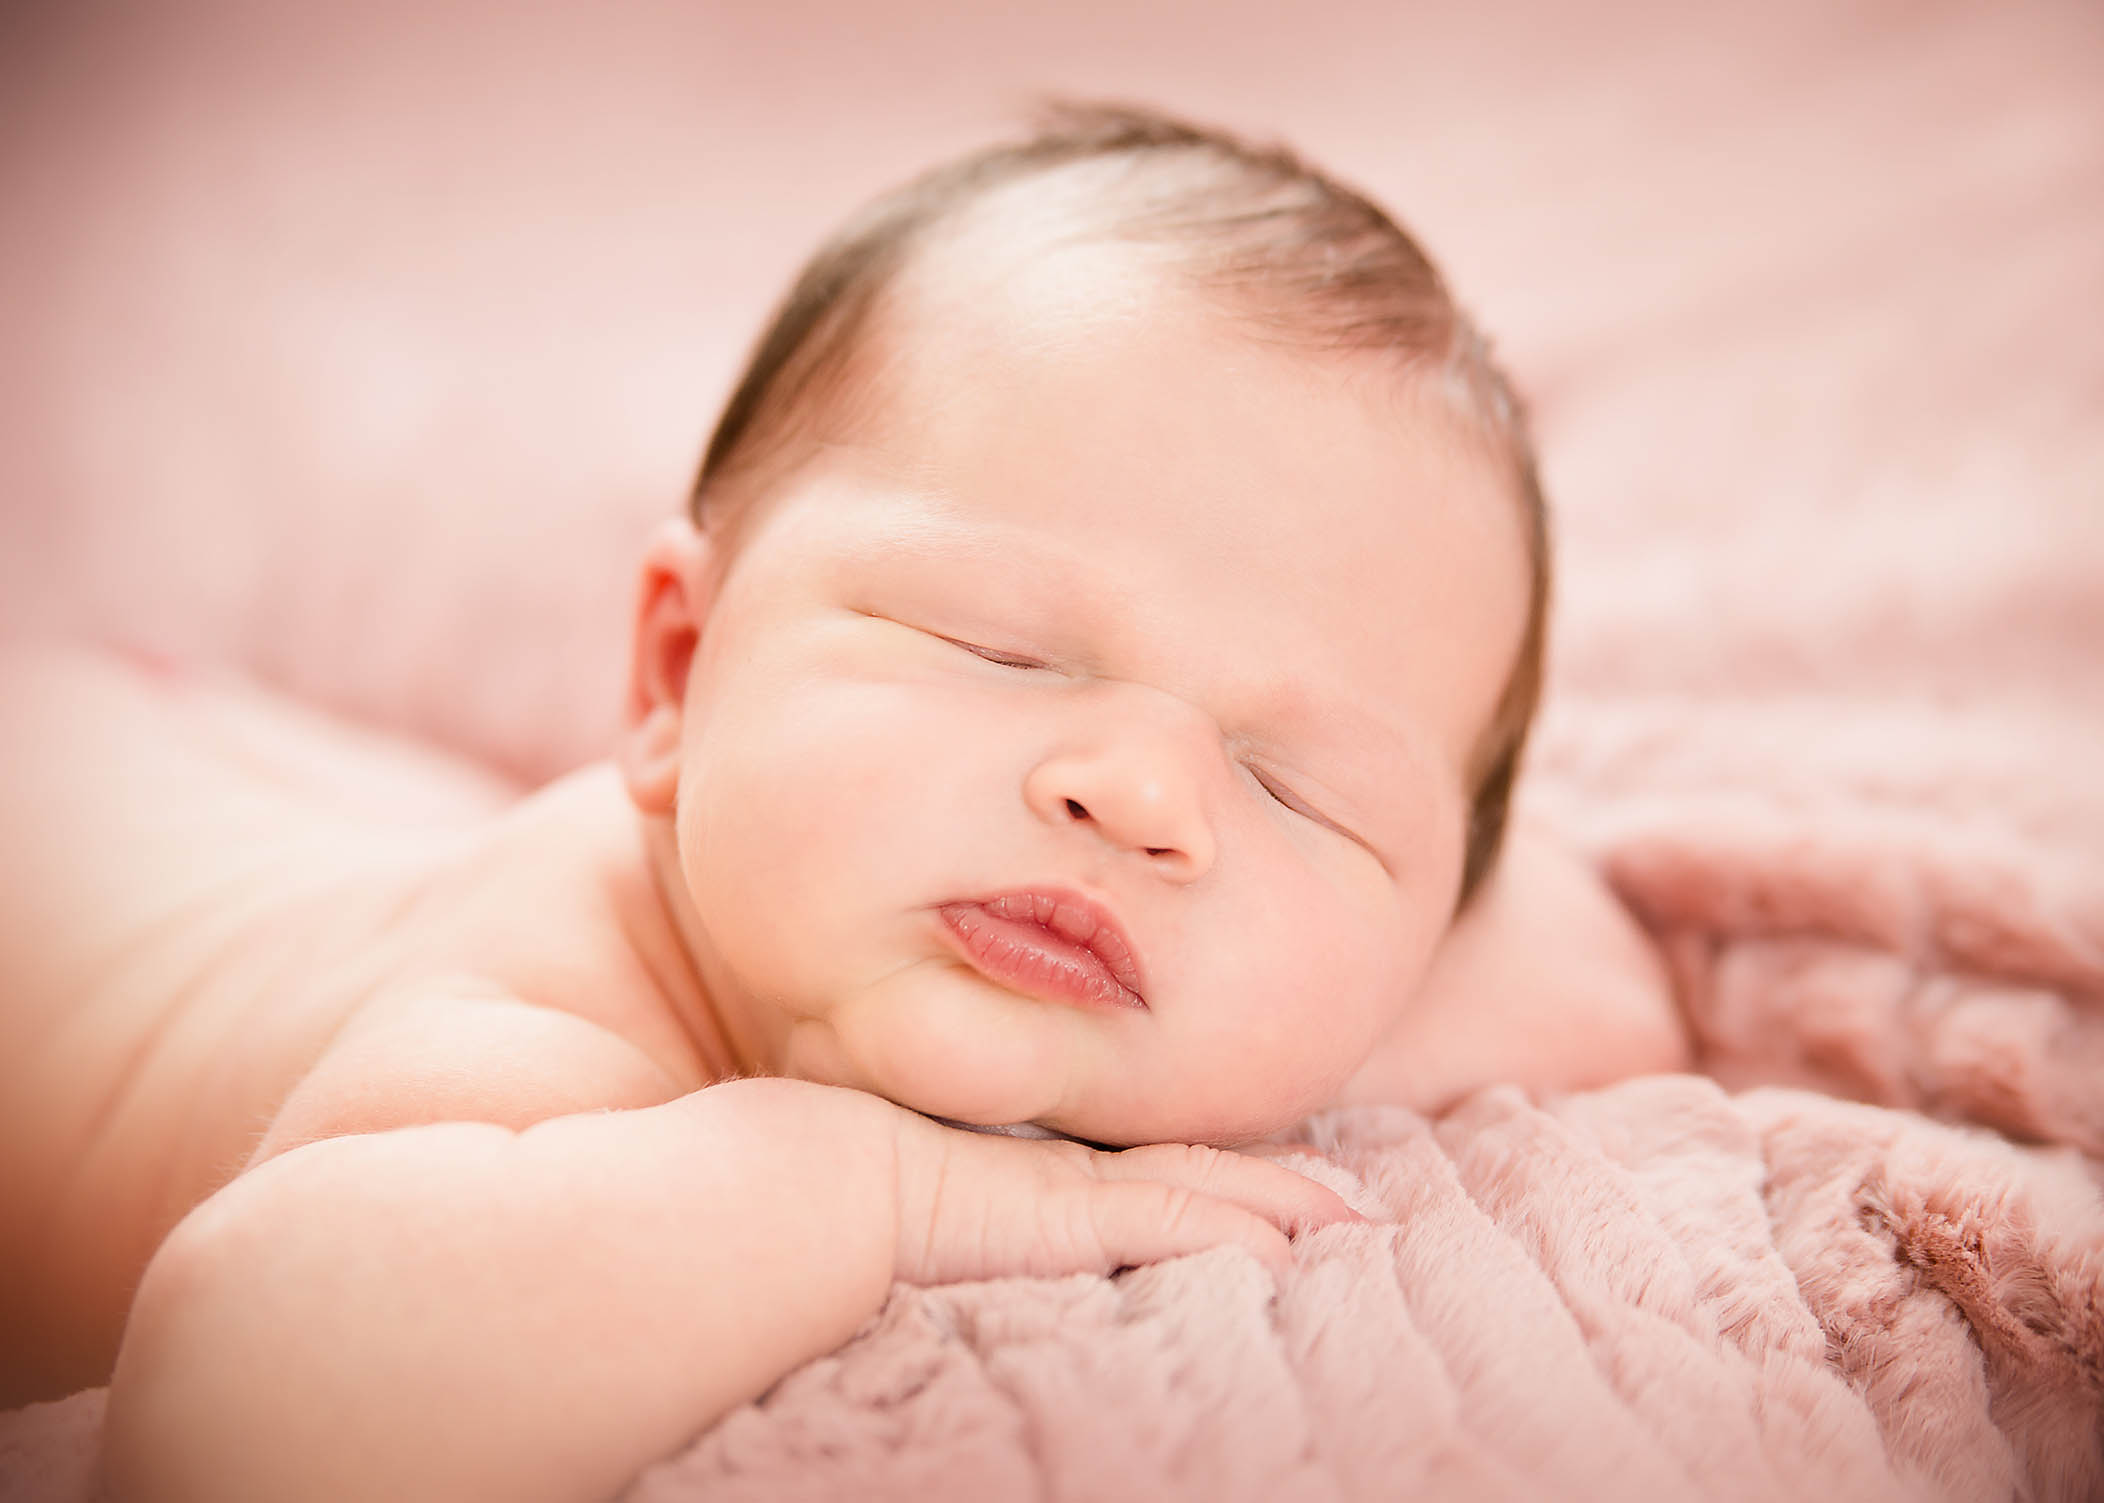 newborn baby girl lying on pink blanket with lips pursed